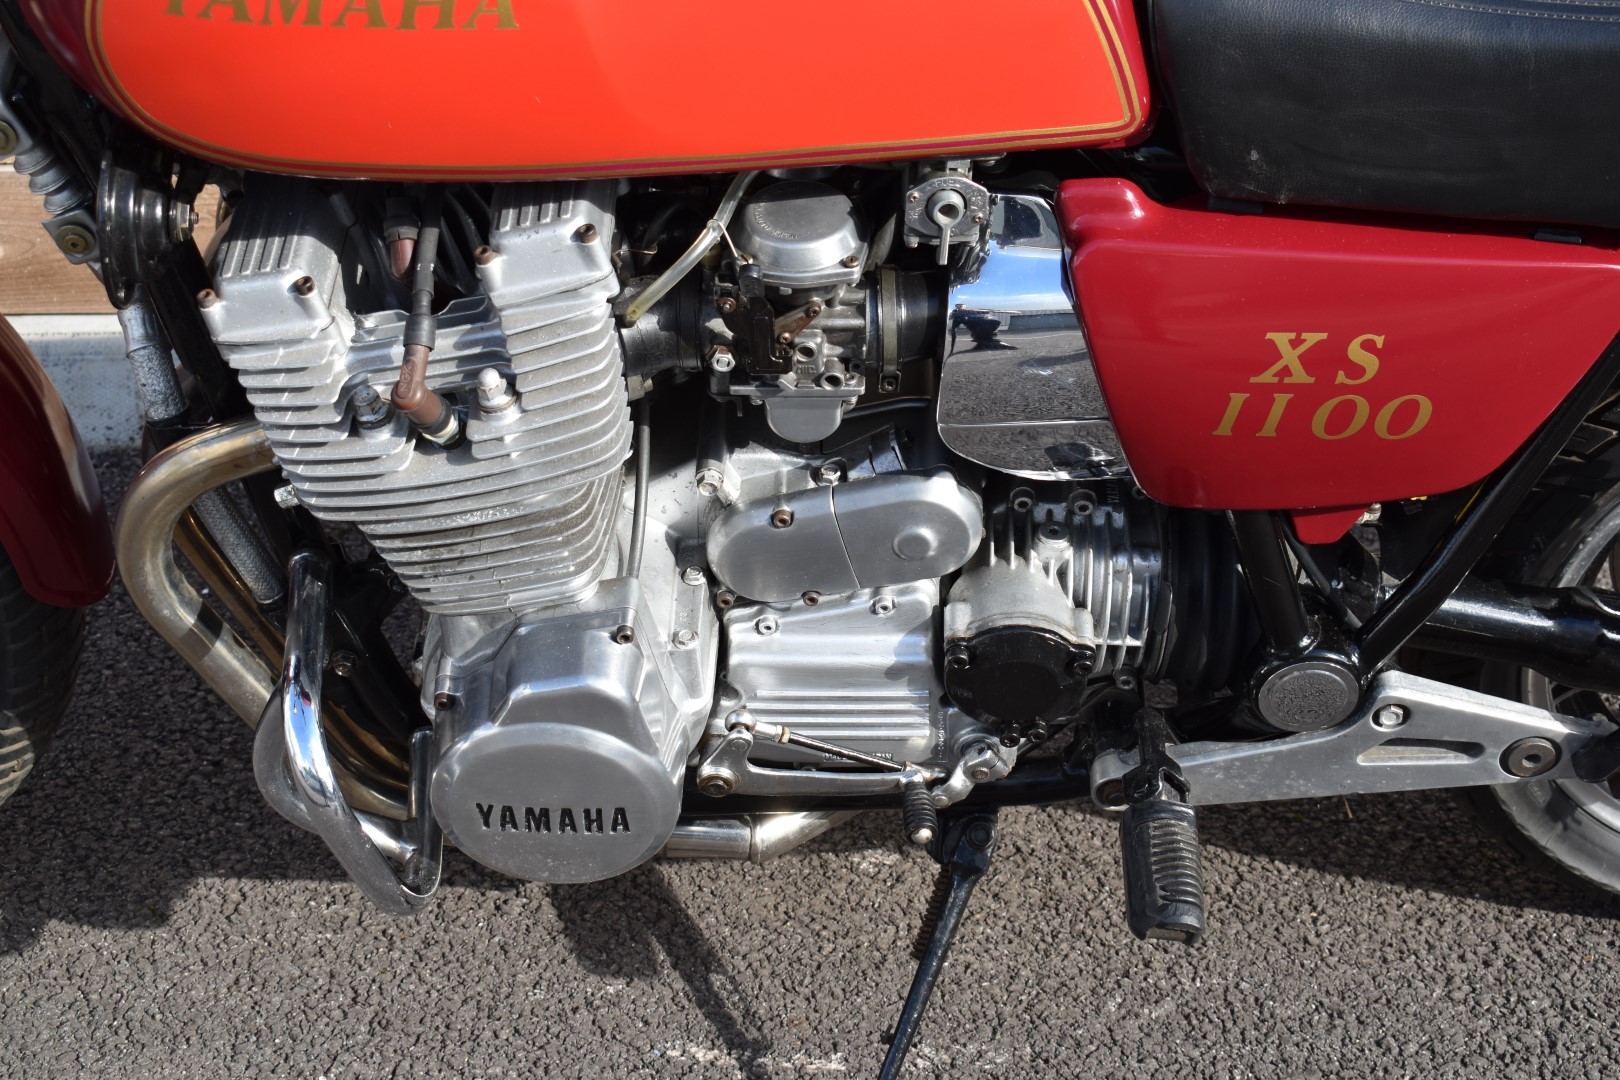 1980 Yamaha XS1100 motorbike registration NGS 439V, with V5c, used by the vendor for continental - Image 5 of 17